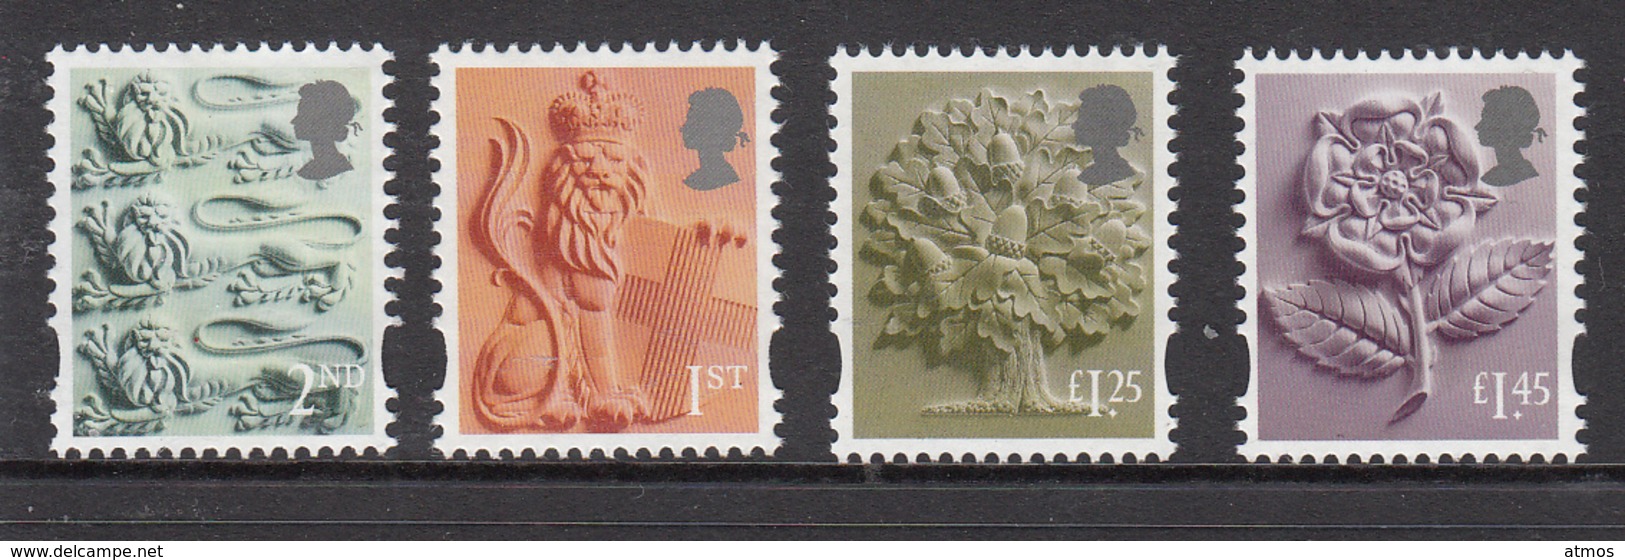 Great Britain MNH Country Definitives England 2018 - Engeland